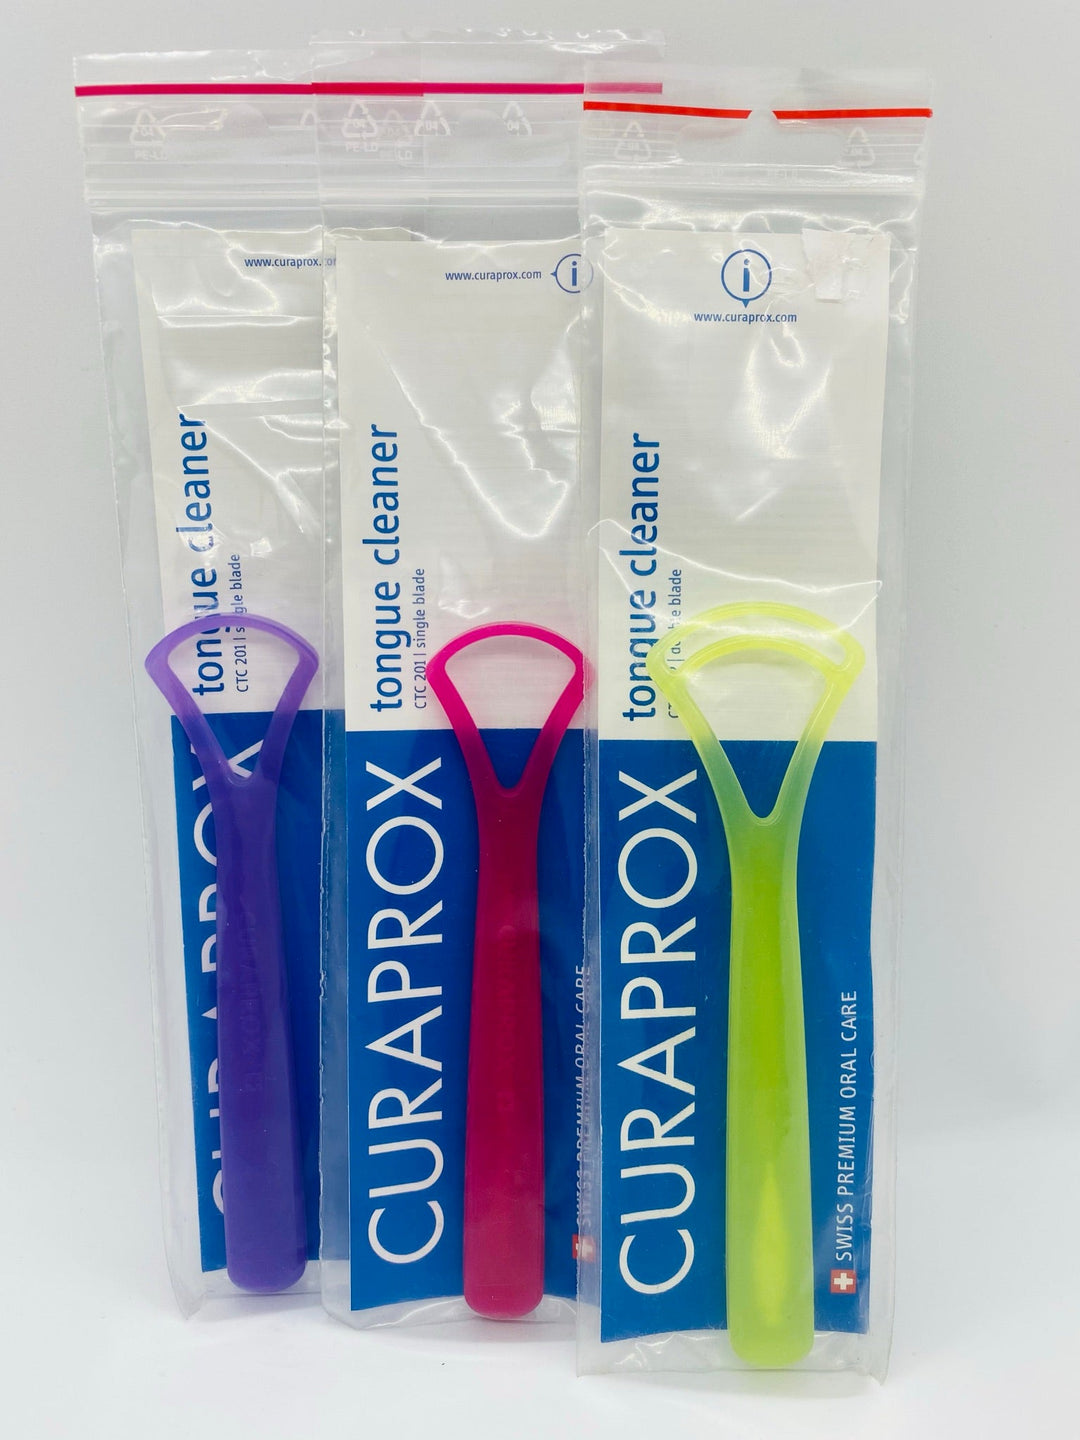 Curaprox Tongue Cleaner